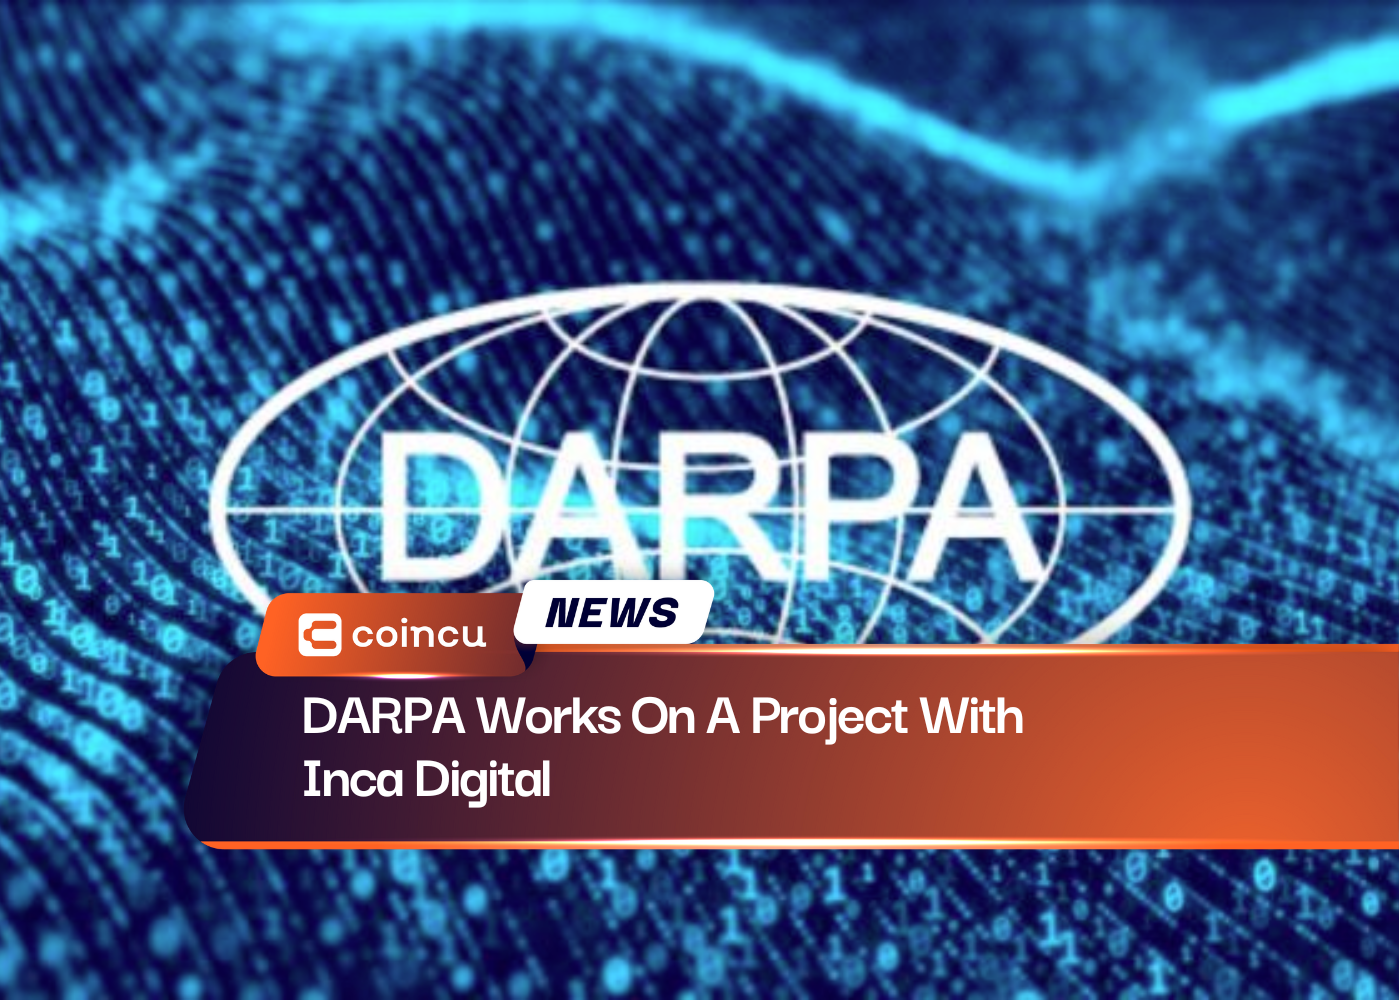 DARPA Works On A Project With Inca Digital